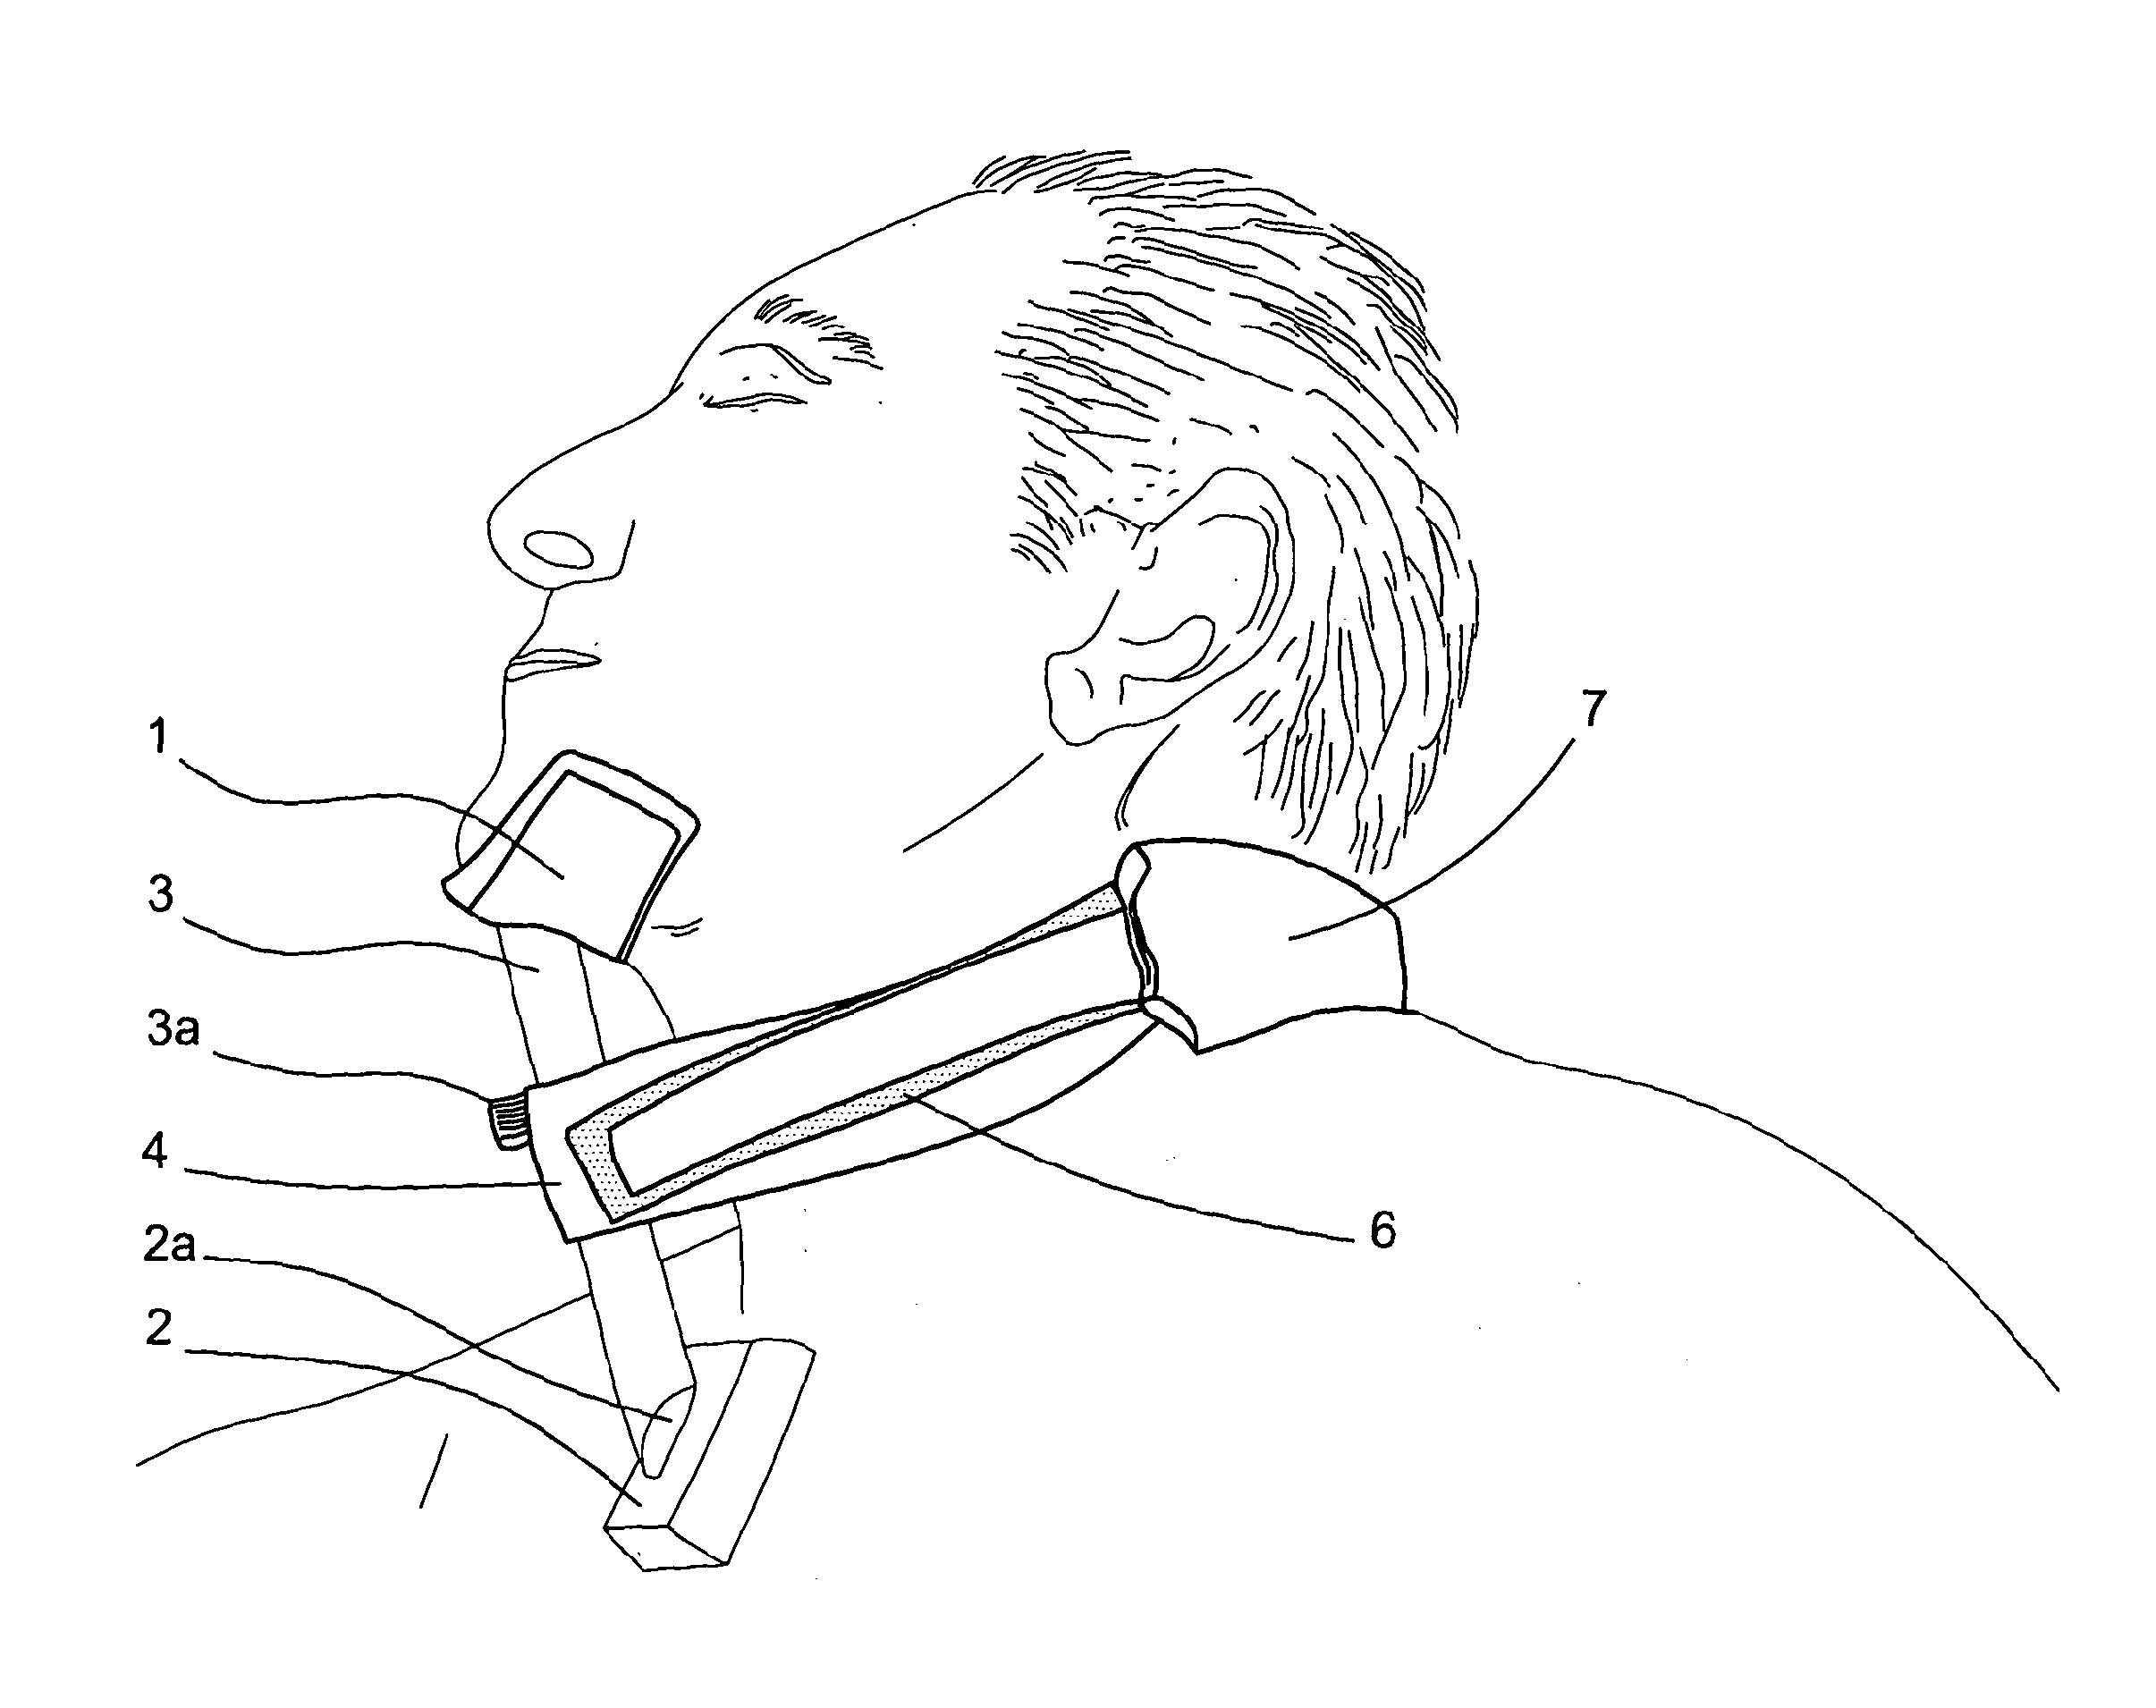 Chin and neck support device